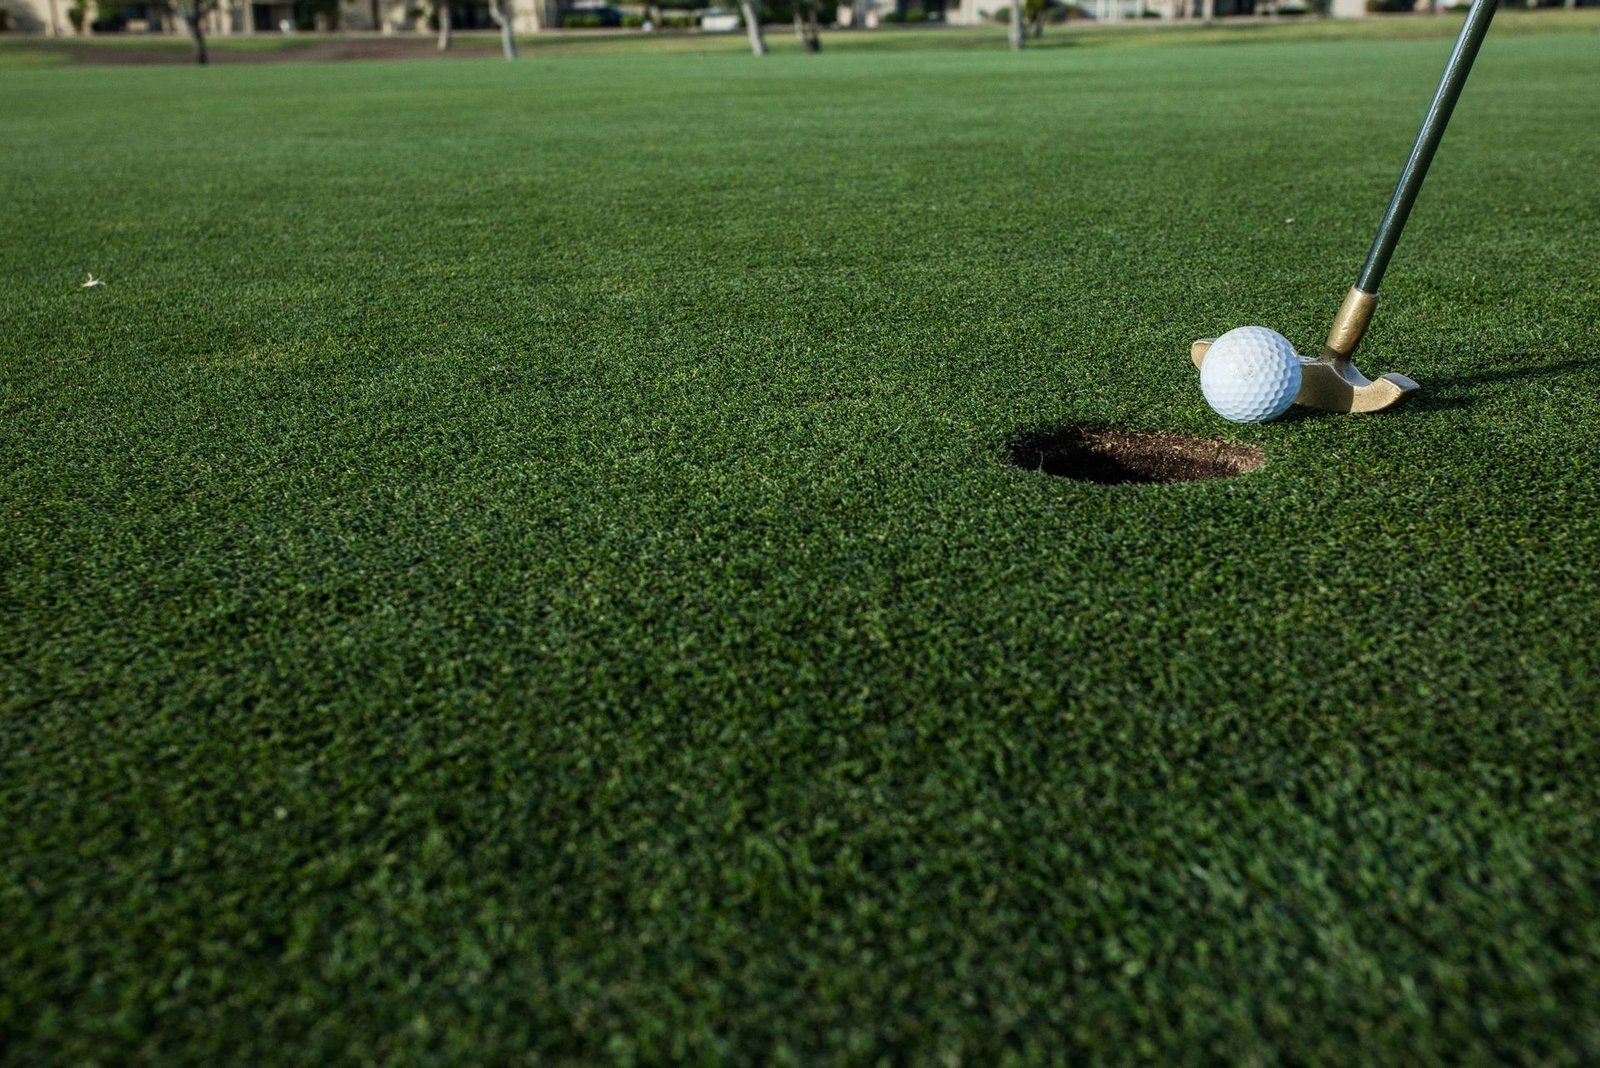 A close-up photo of a golf ball about to be putted into a hole on a well-manicured golf green. The golfer's club is positioned behind the ball, ready to make the shot. Thanks to professional turf installers, the background shows a pristine view of a golf course in St. Bradenton outdoor space.